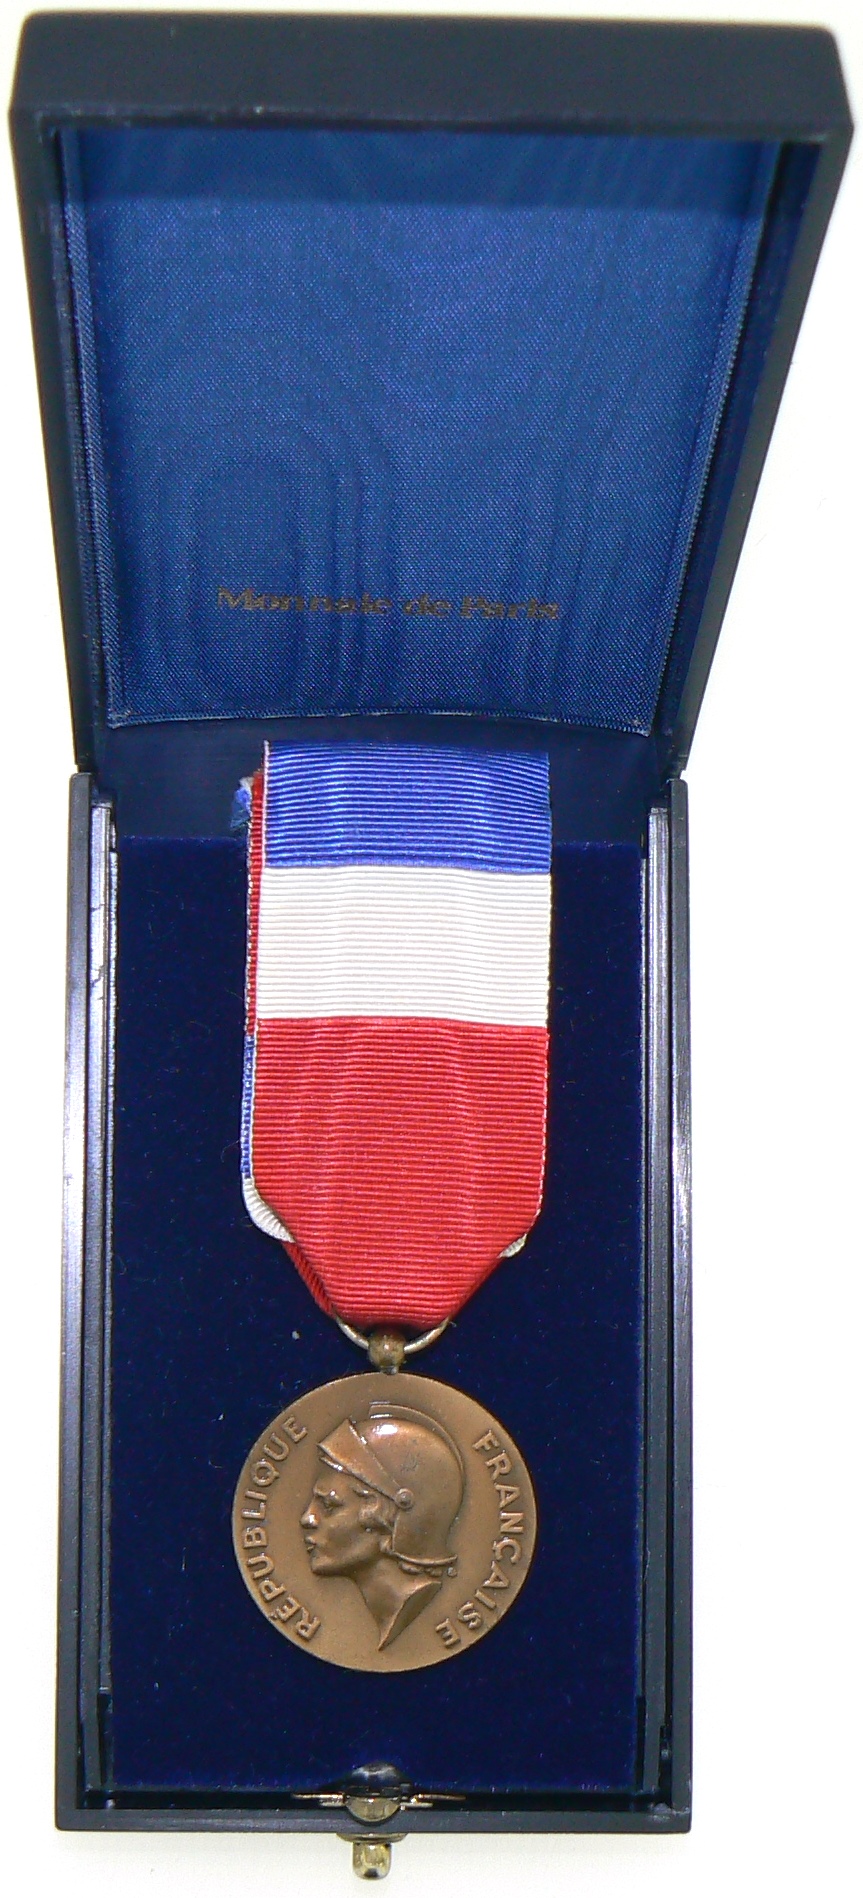 Honor Medal of the Defense Ministry, for Civil